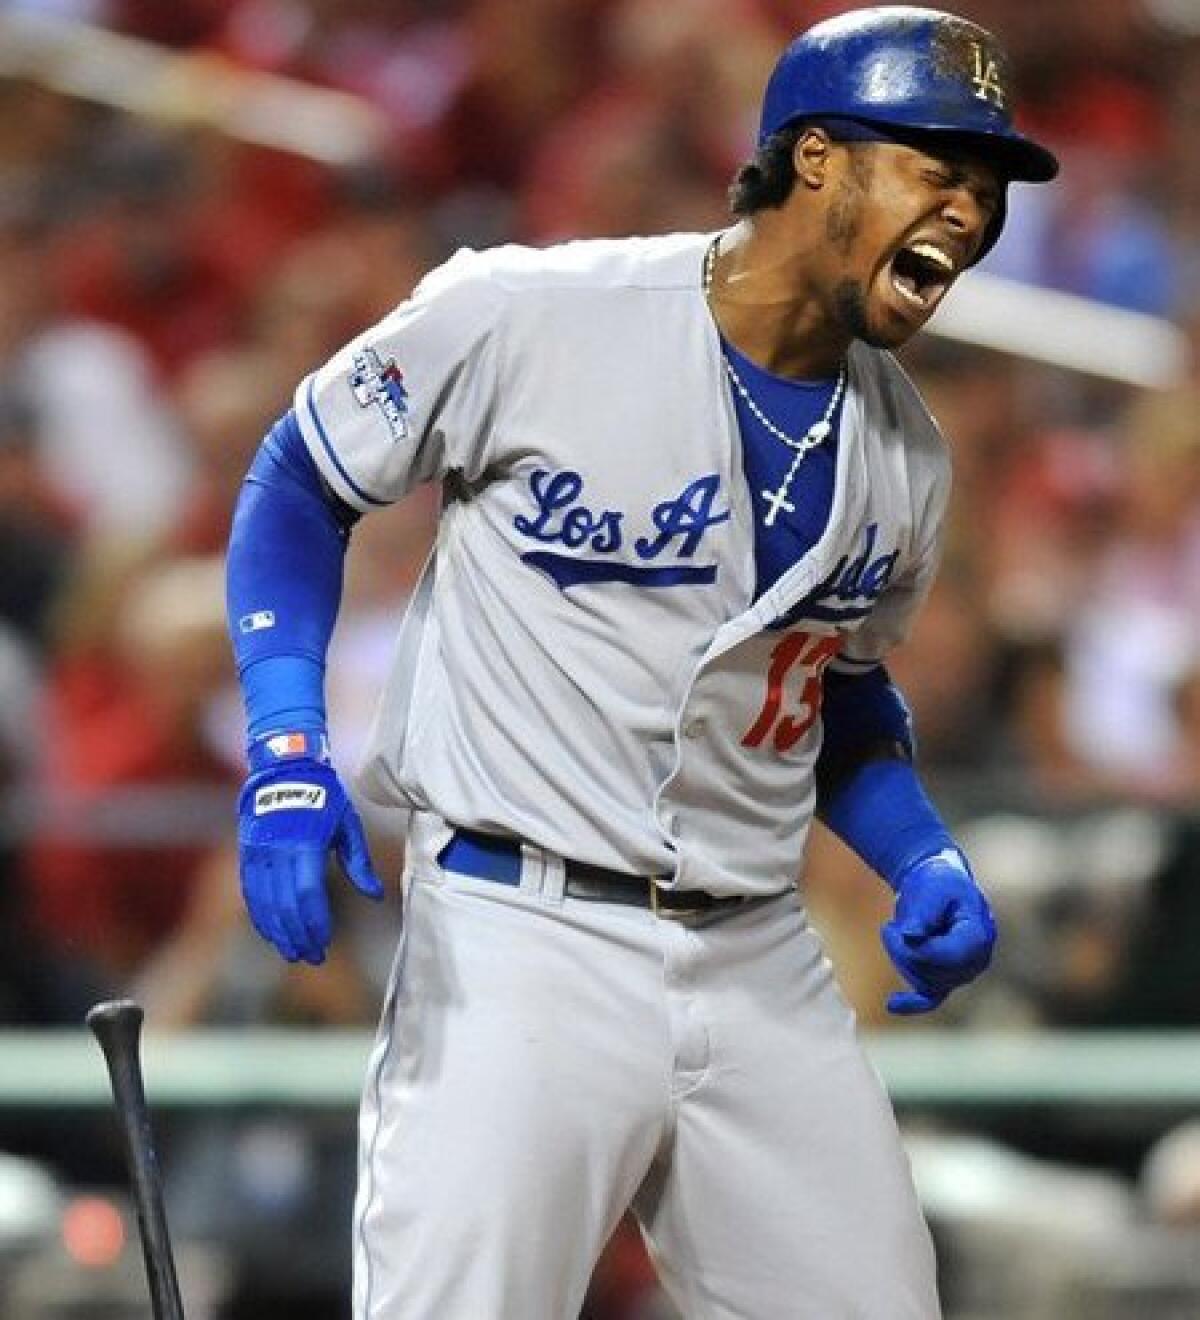 Dodgers shortstop Hanley Ramirez reacts after getting hit in the ribs by a pitch in the first inning.